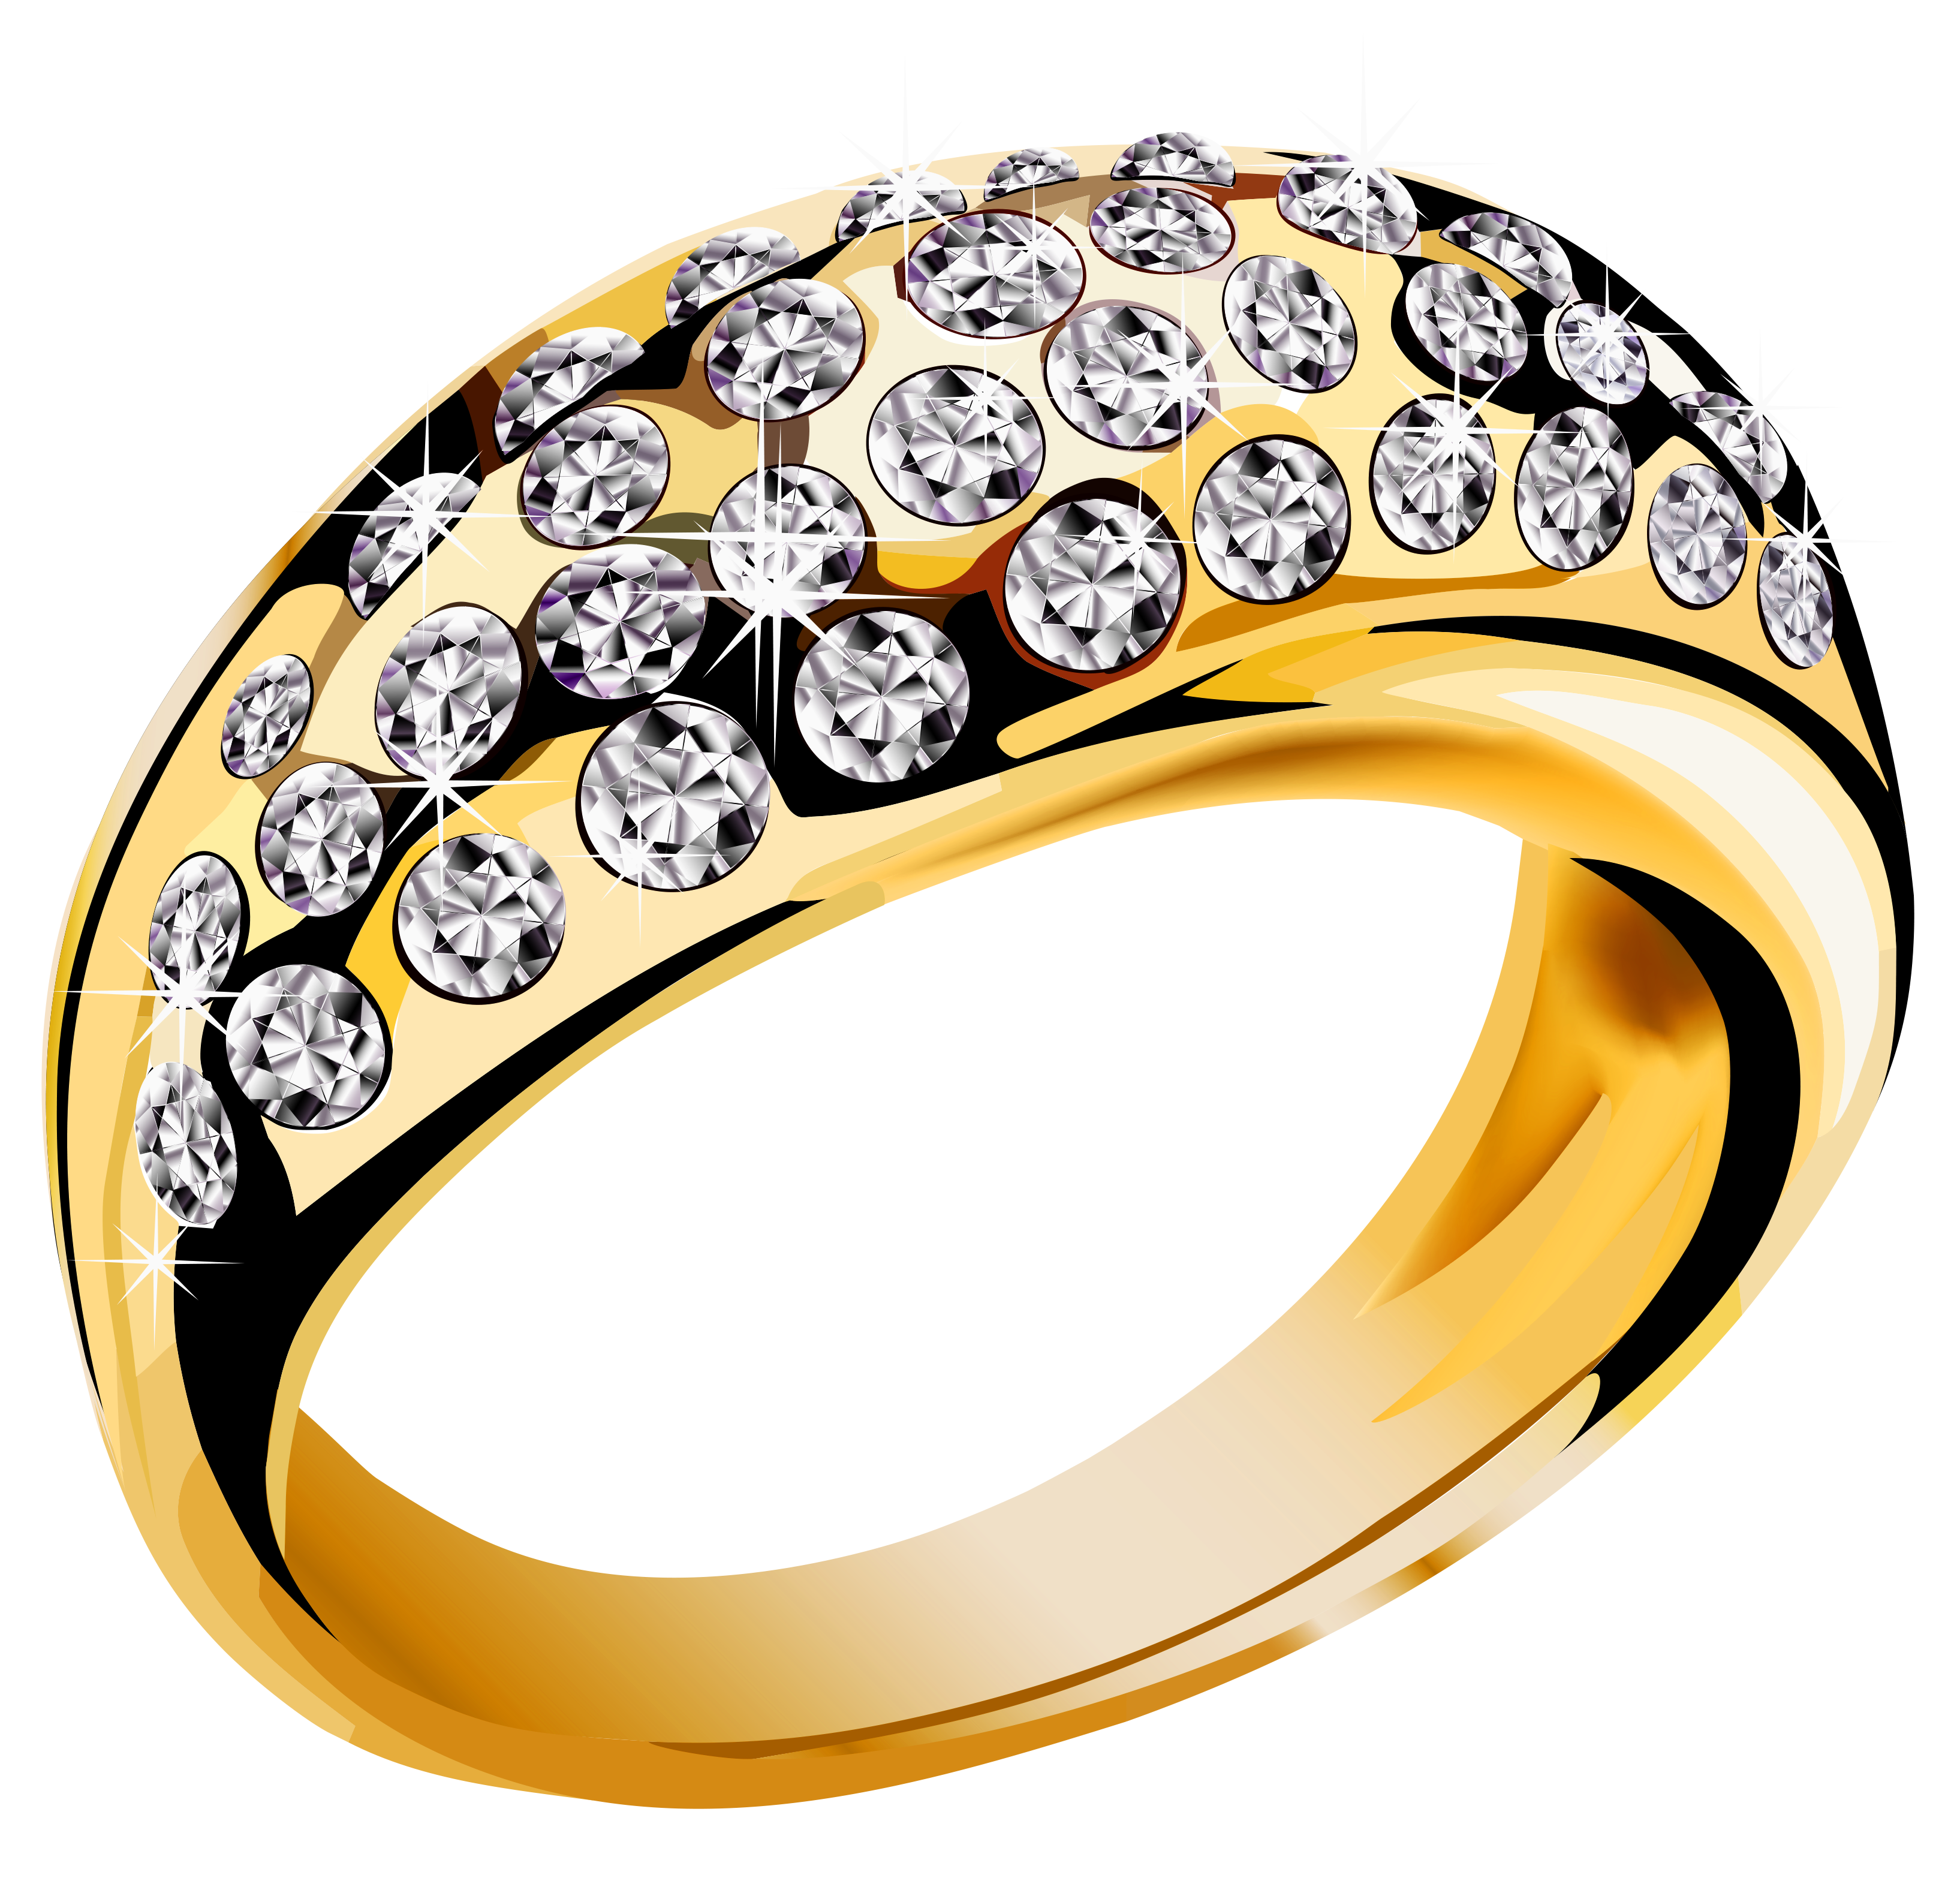 Wedding Ring Clipart Png   Clipart Panda   Free Clipart Images